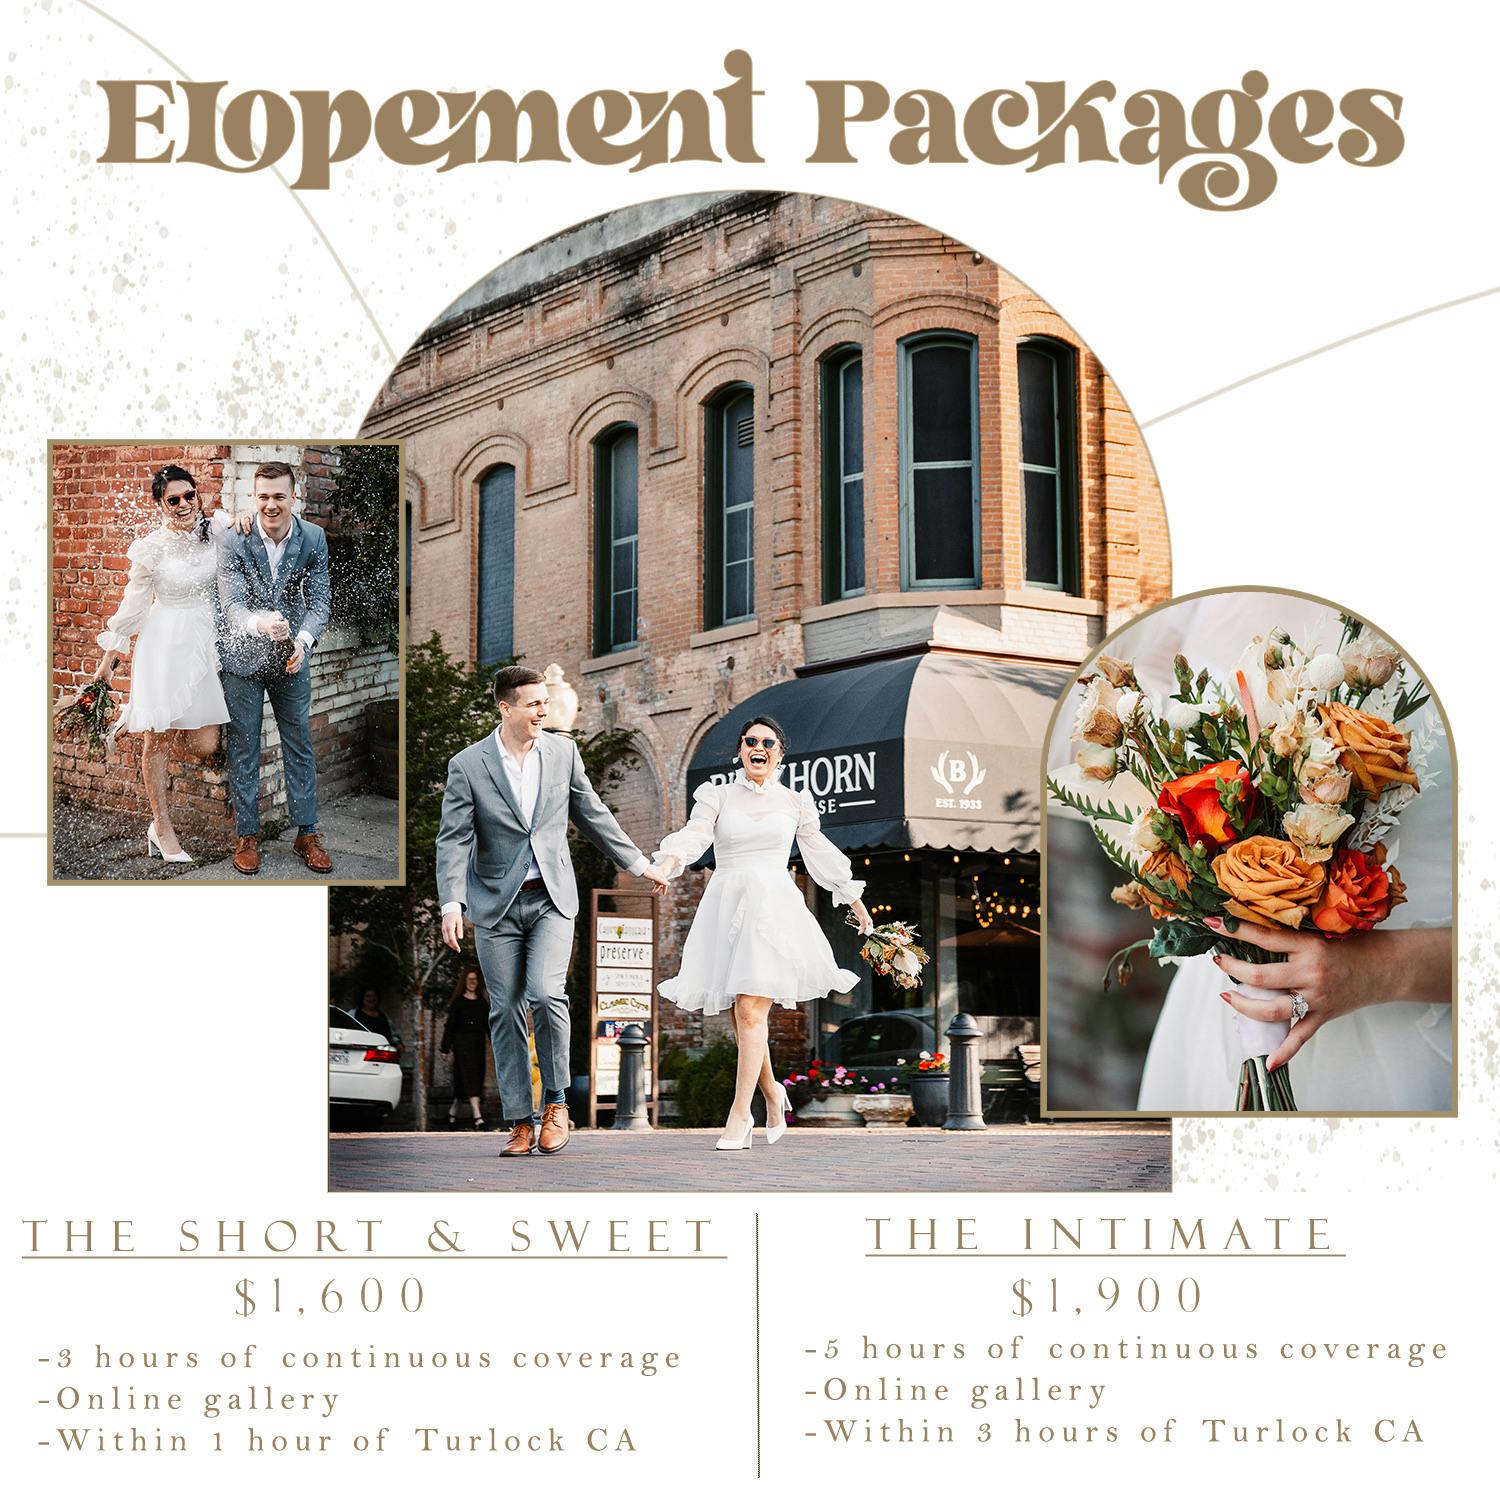 Elopement packages